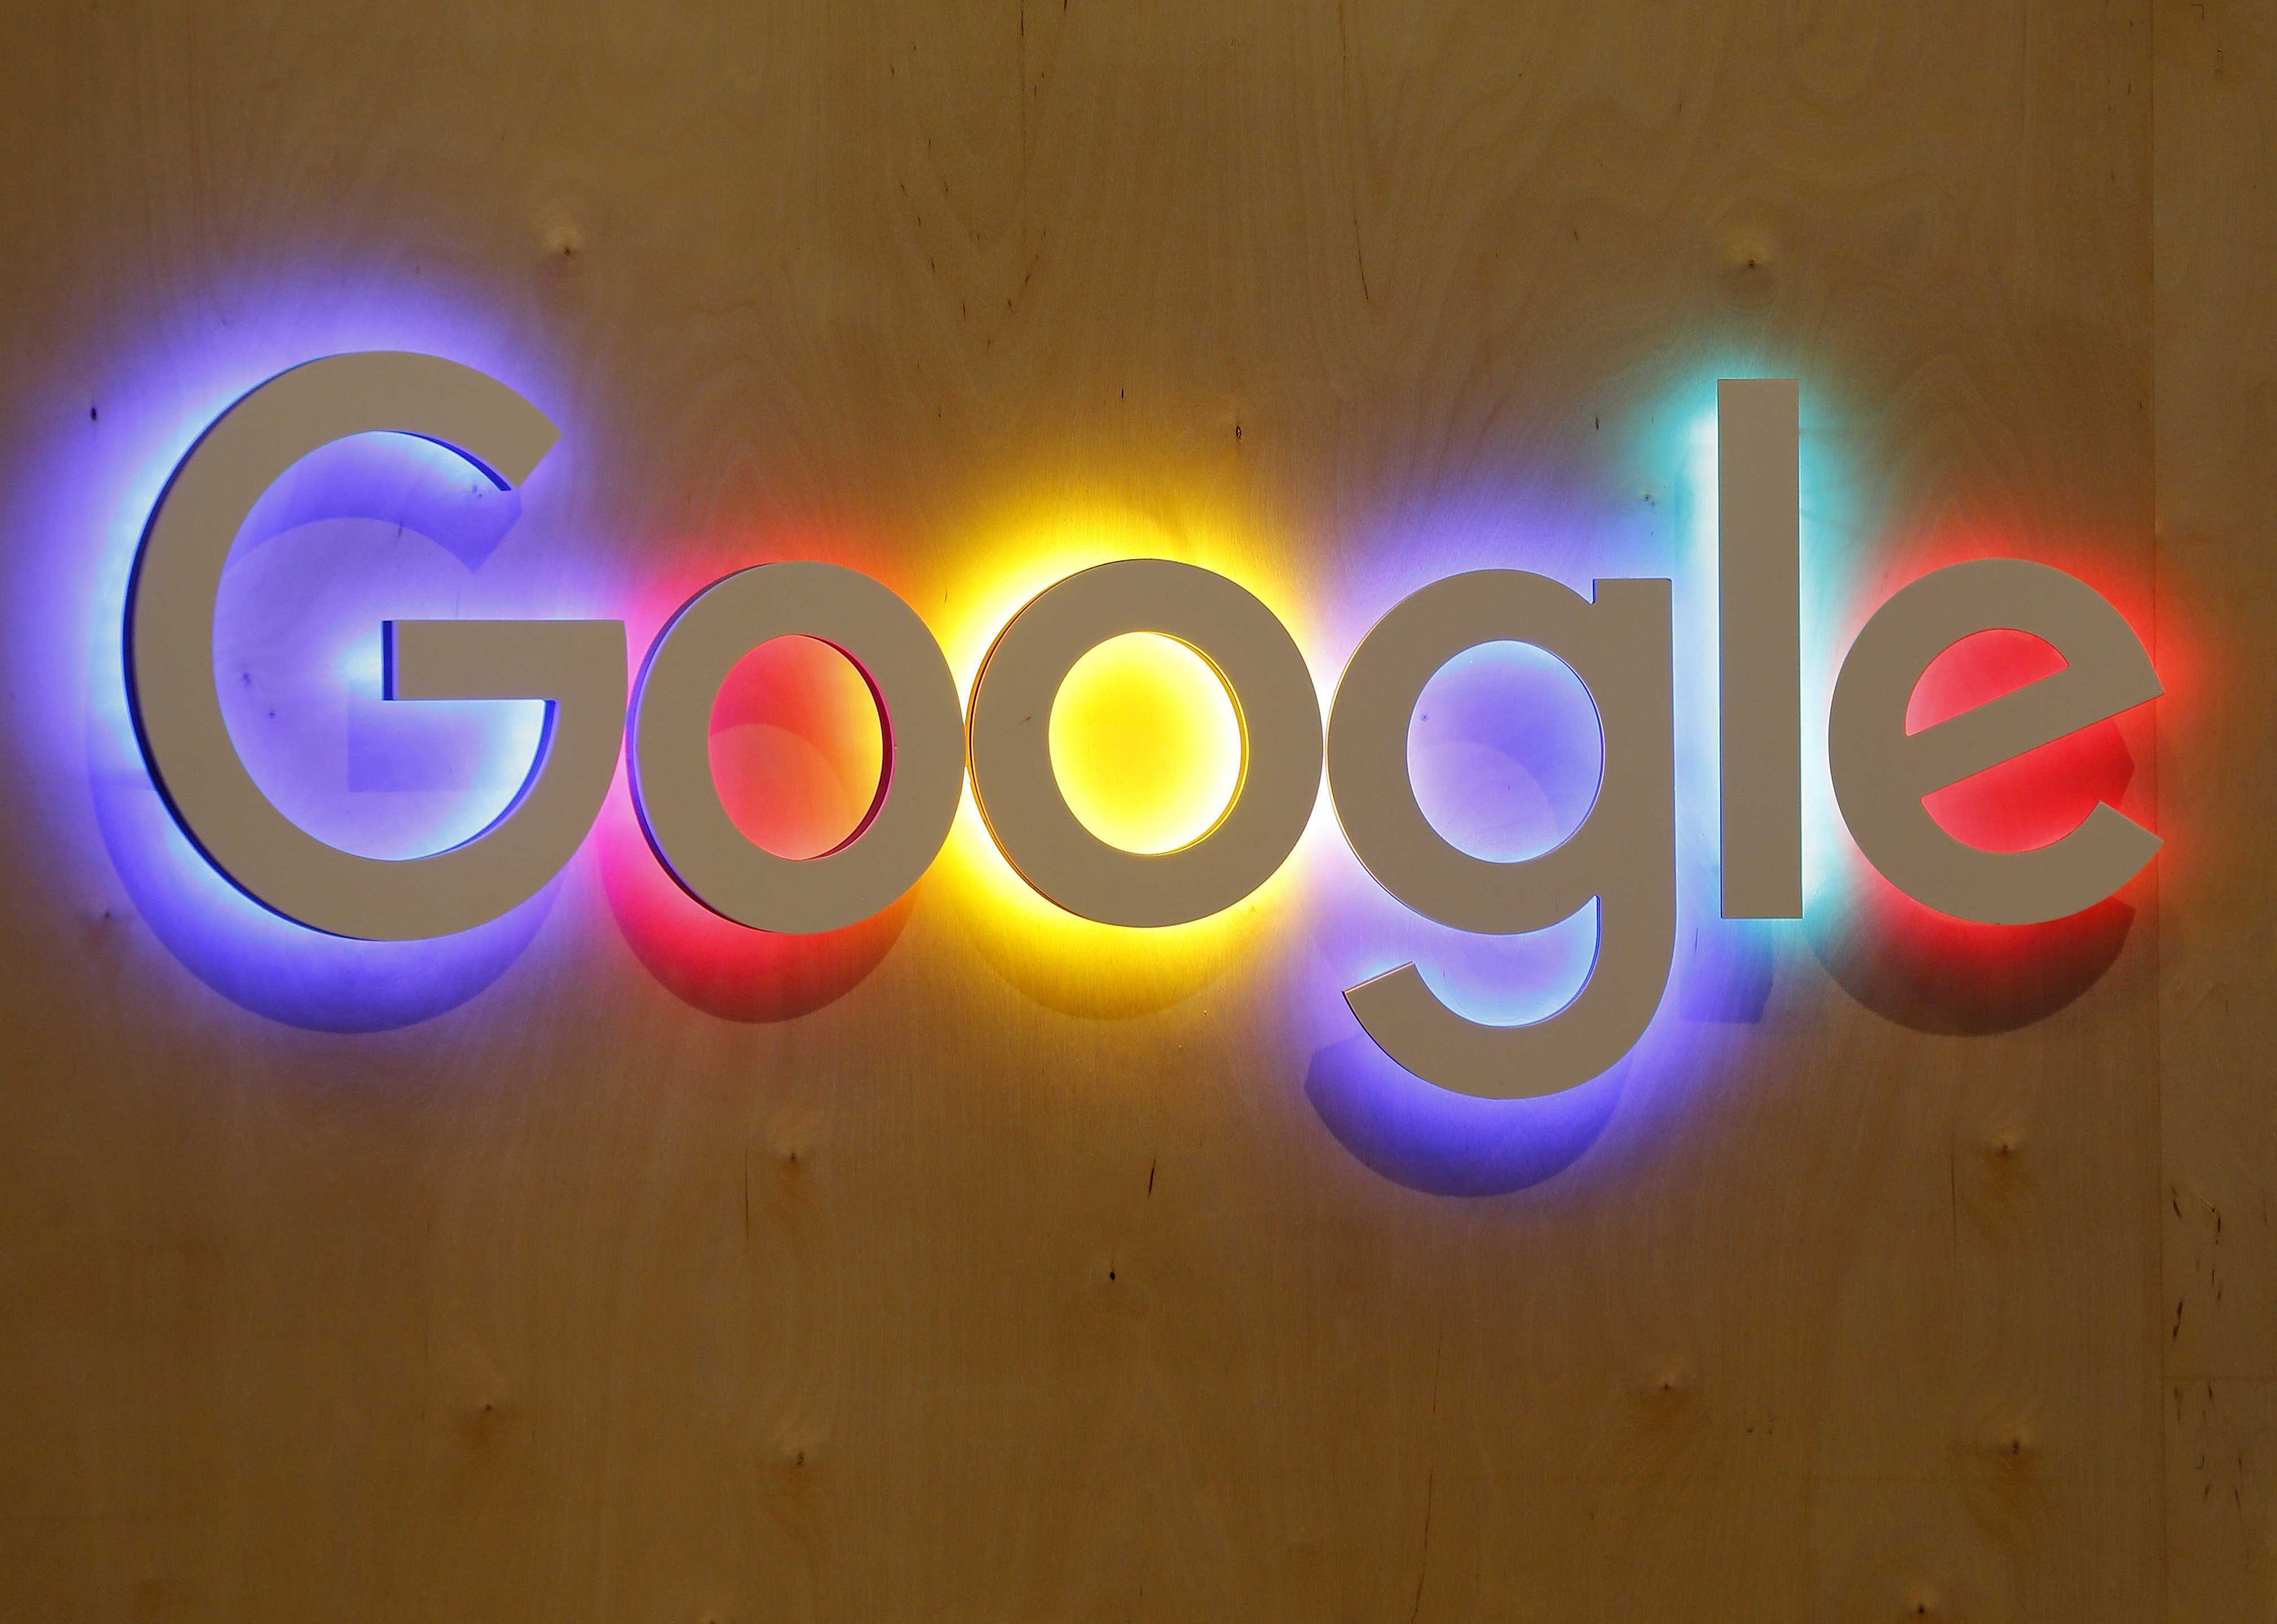 Ex-Google engineer: I was fired for pushing back on discrimination